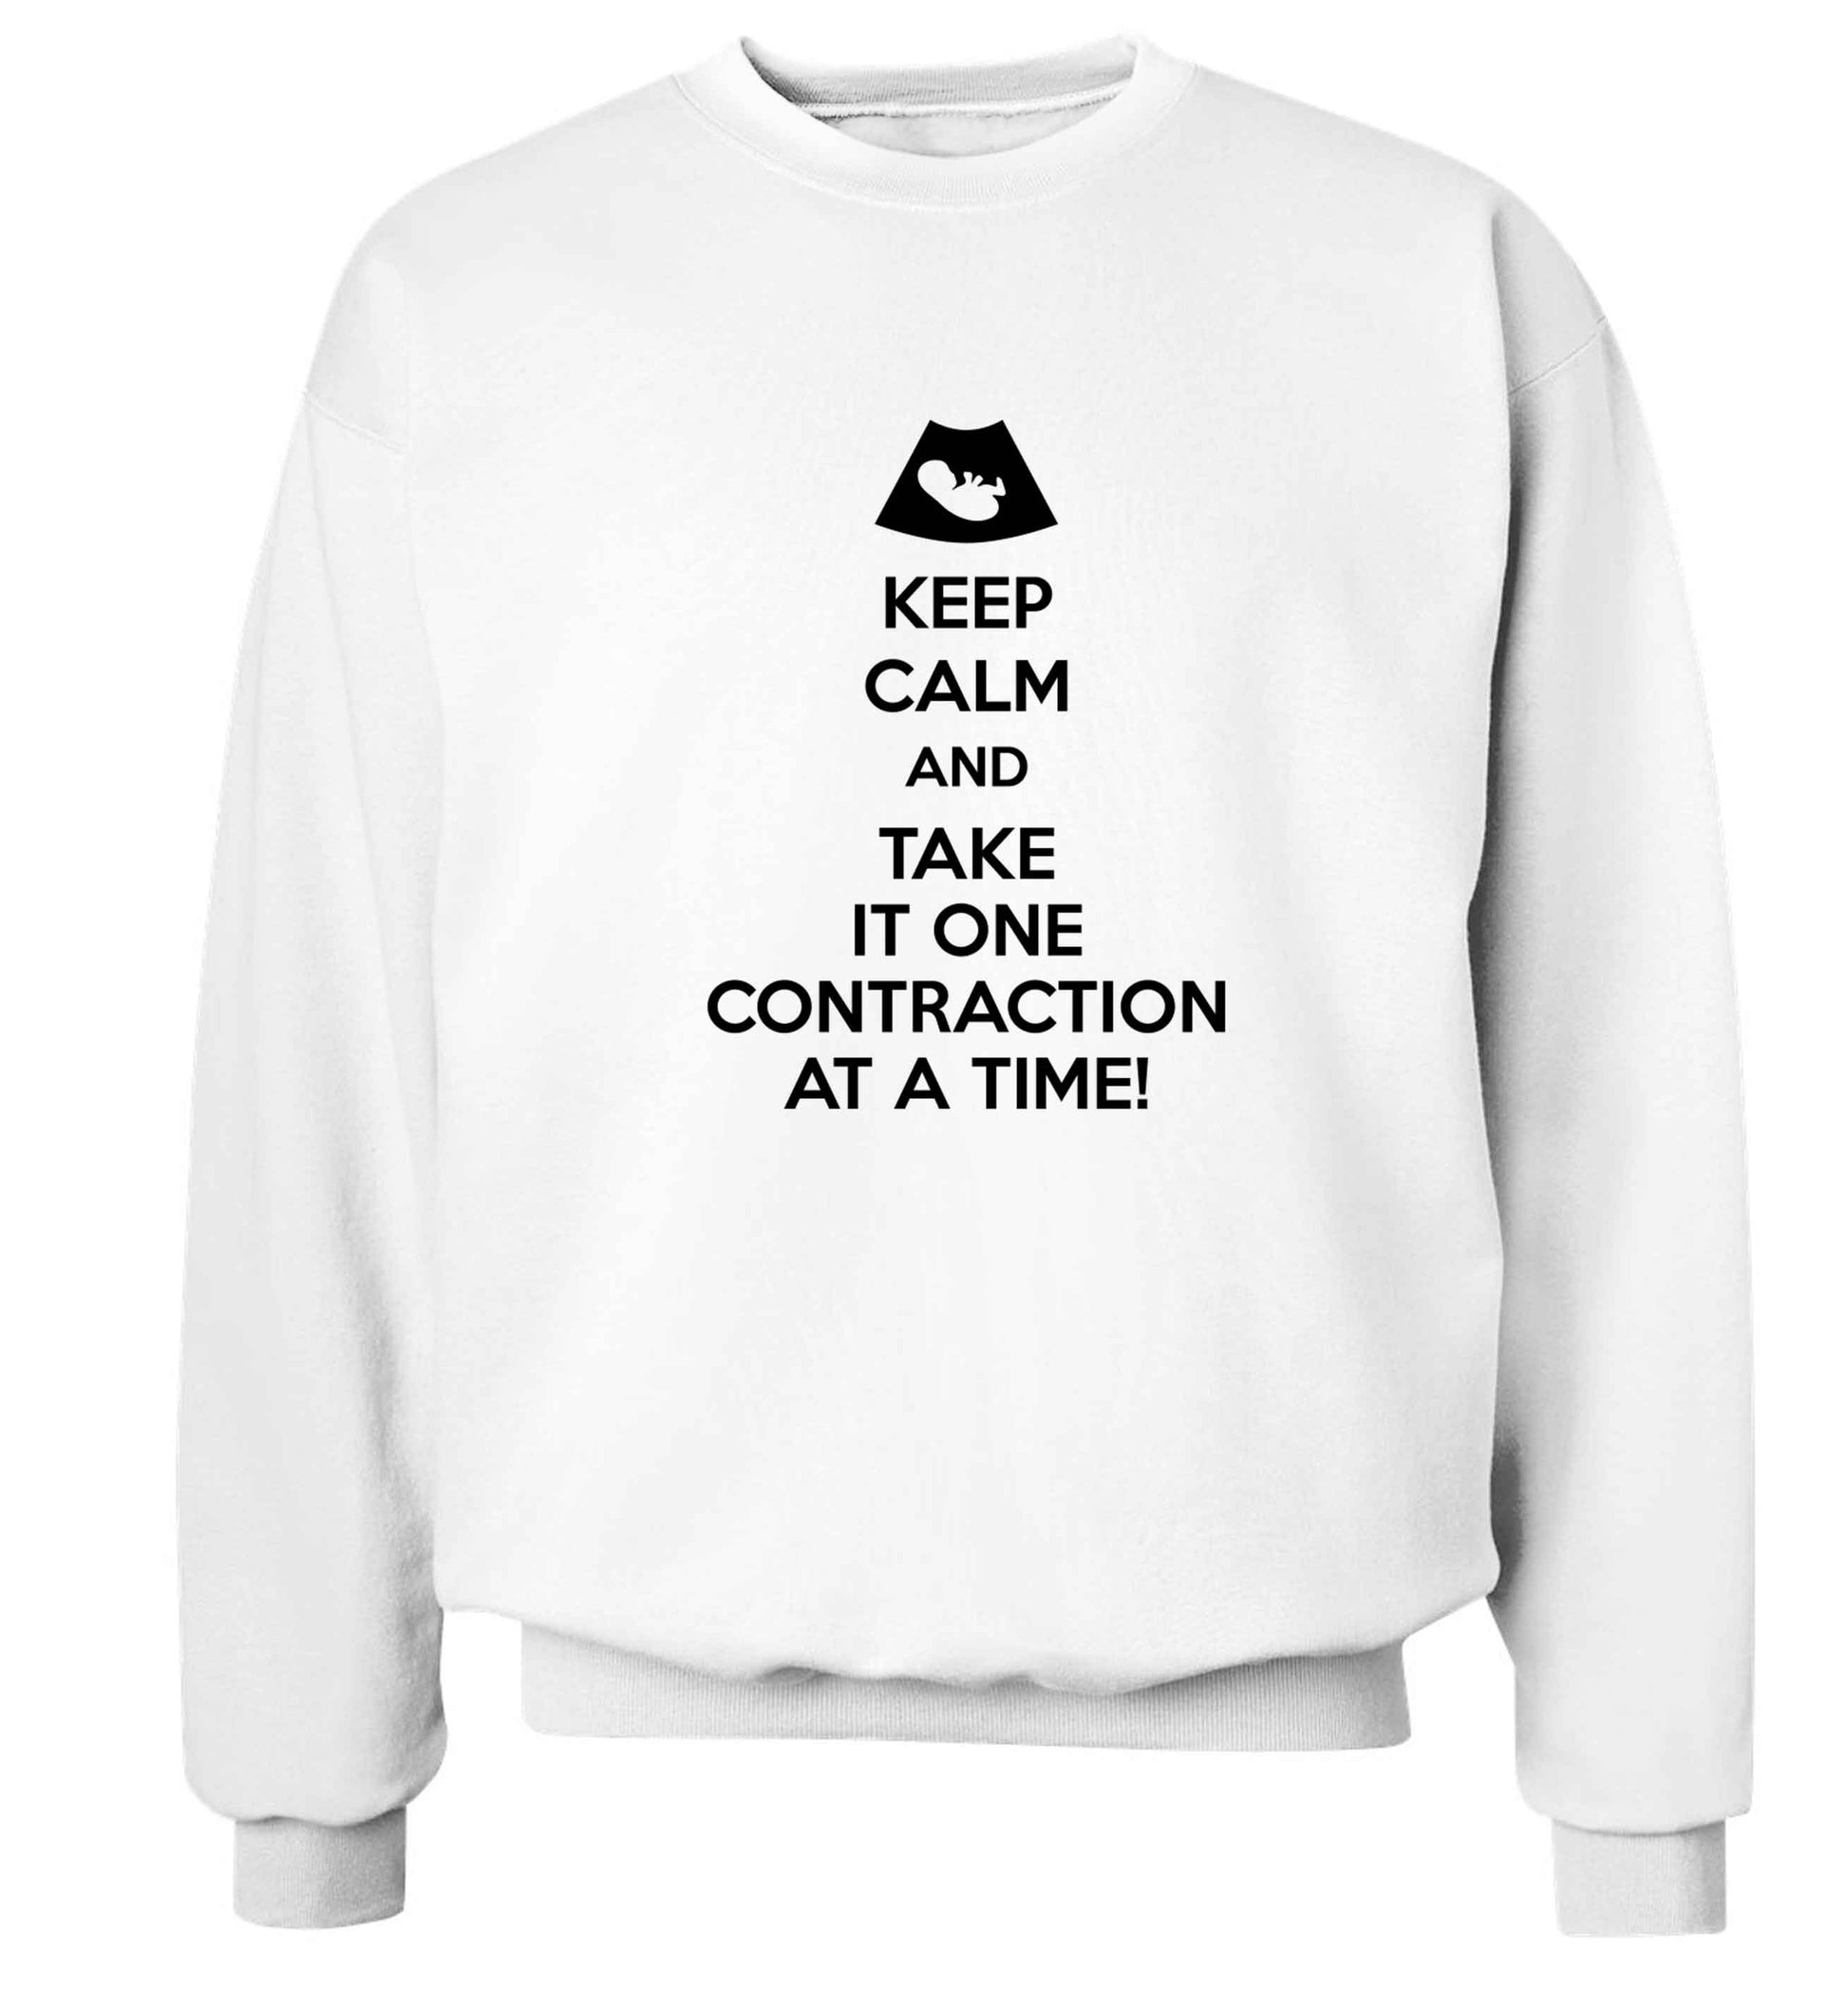 Keep calm and take it one contraction at a time Adult's unisex white Sweater 2XL